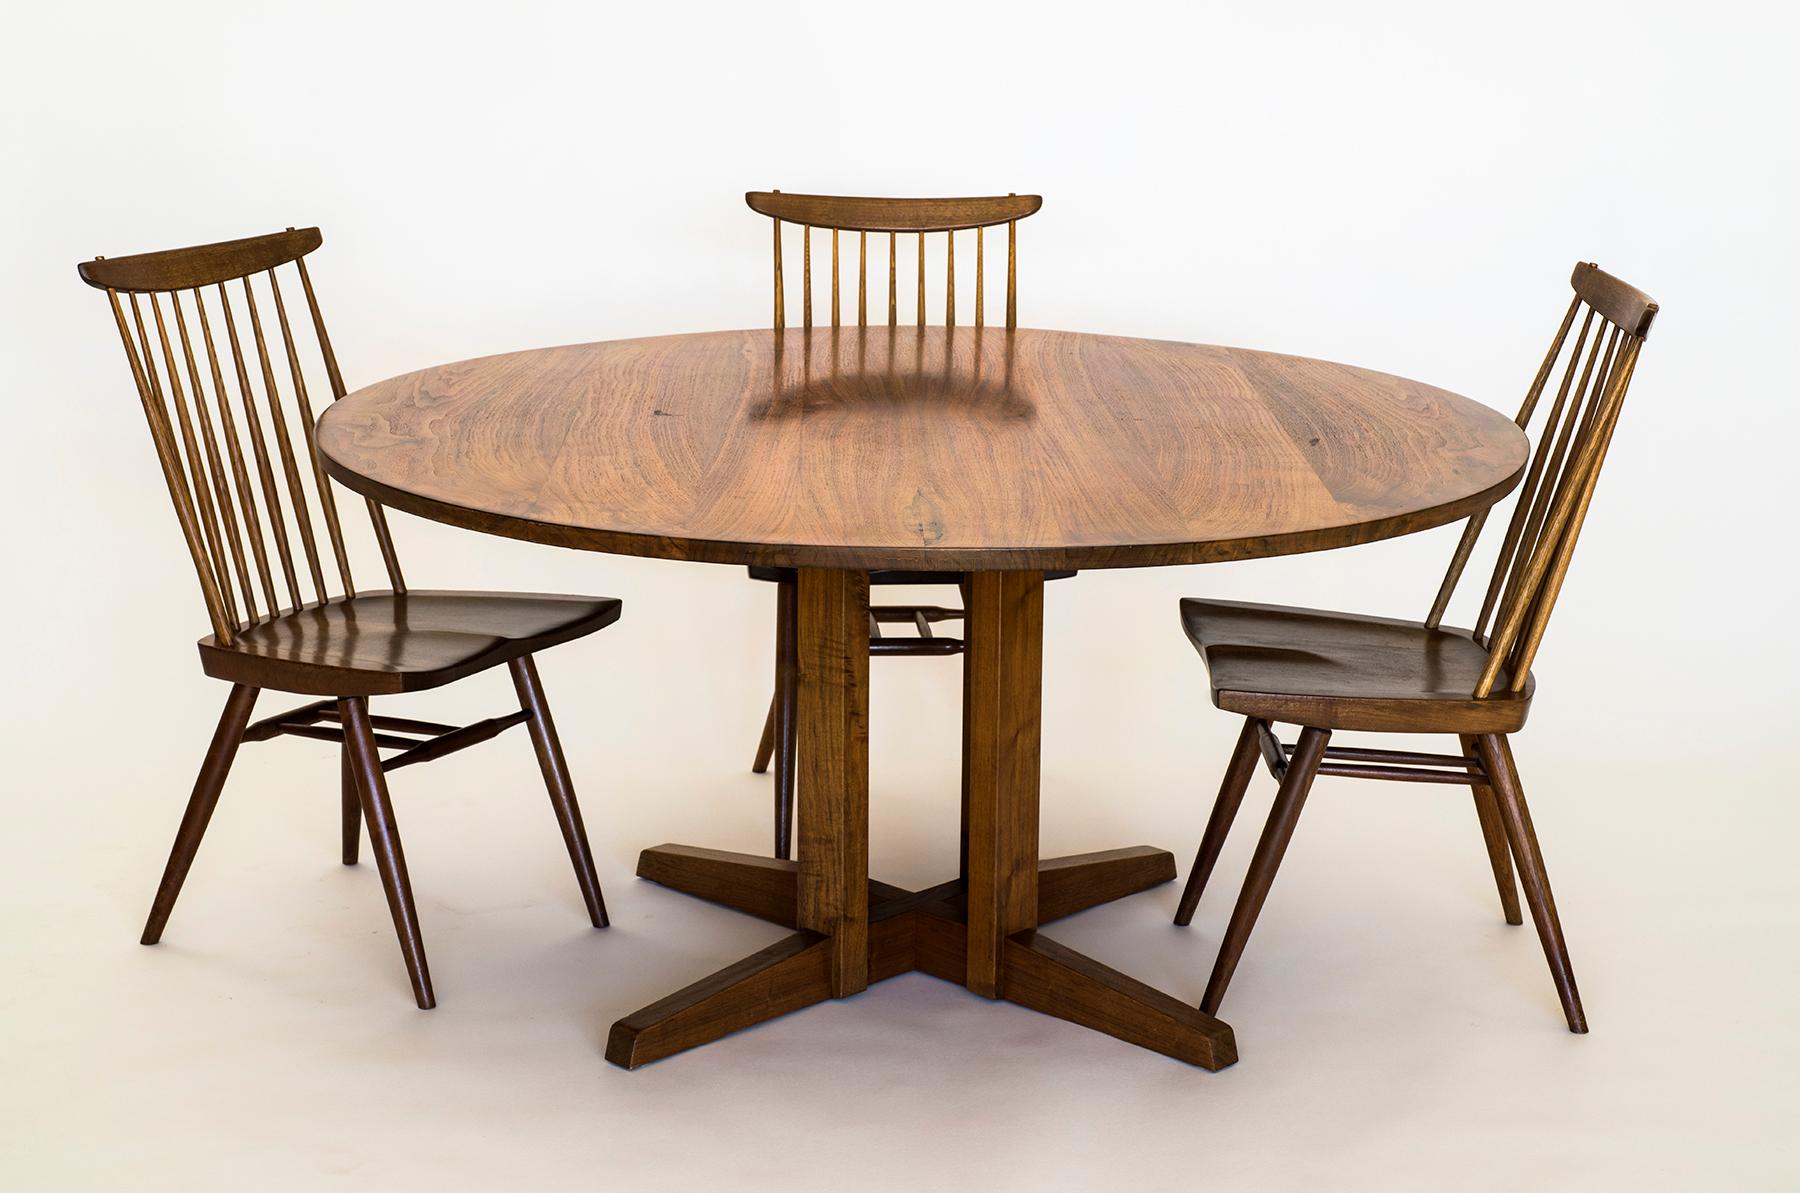 A stunning and large early George Nakashima cluster table in walnut.